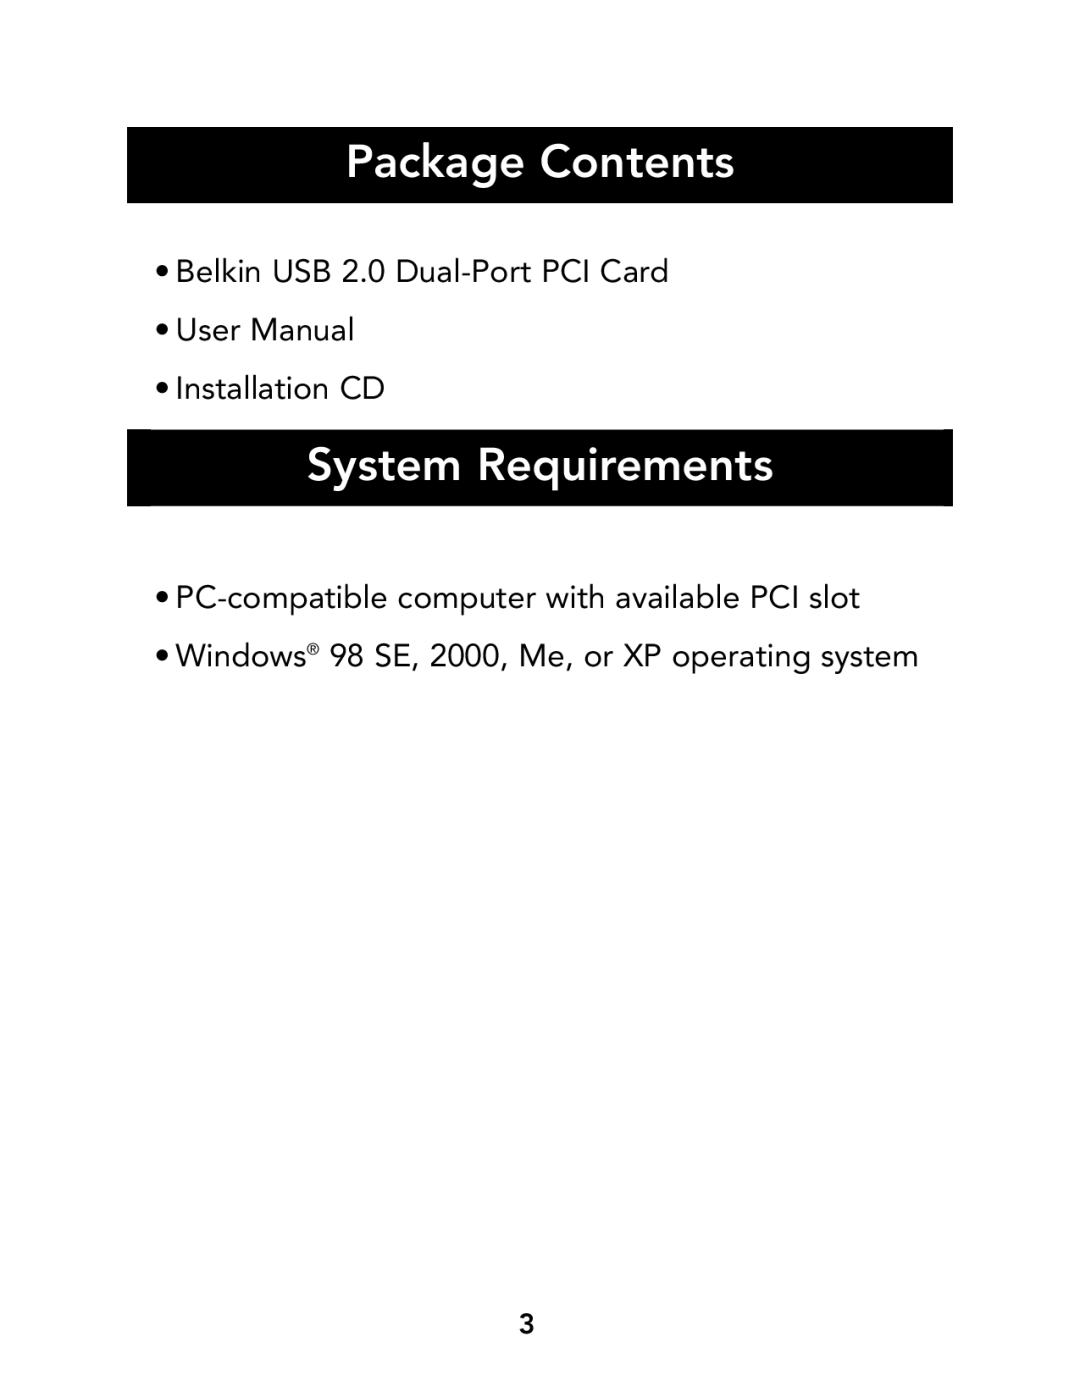 Belkin P73941, F5U219 manual Package Contents, System Requirements, PC-compatible computer with available PCI slot 